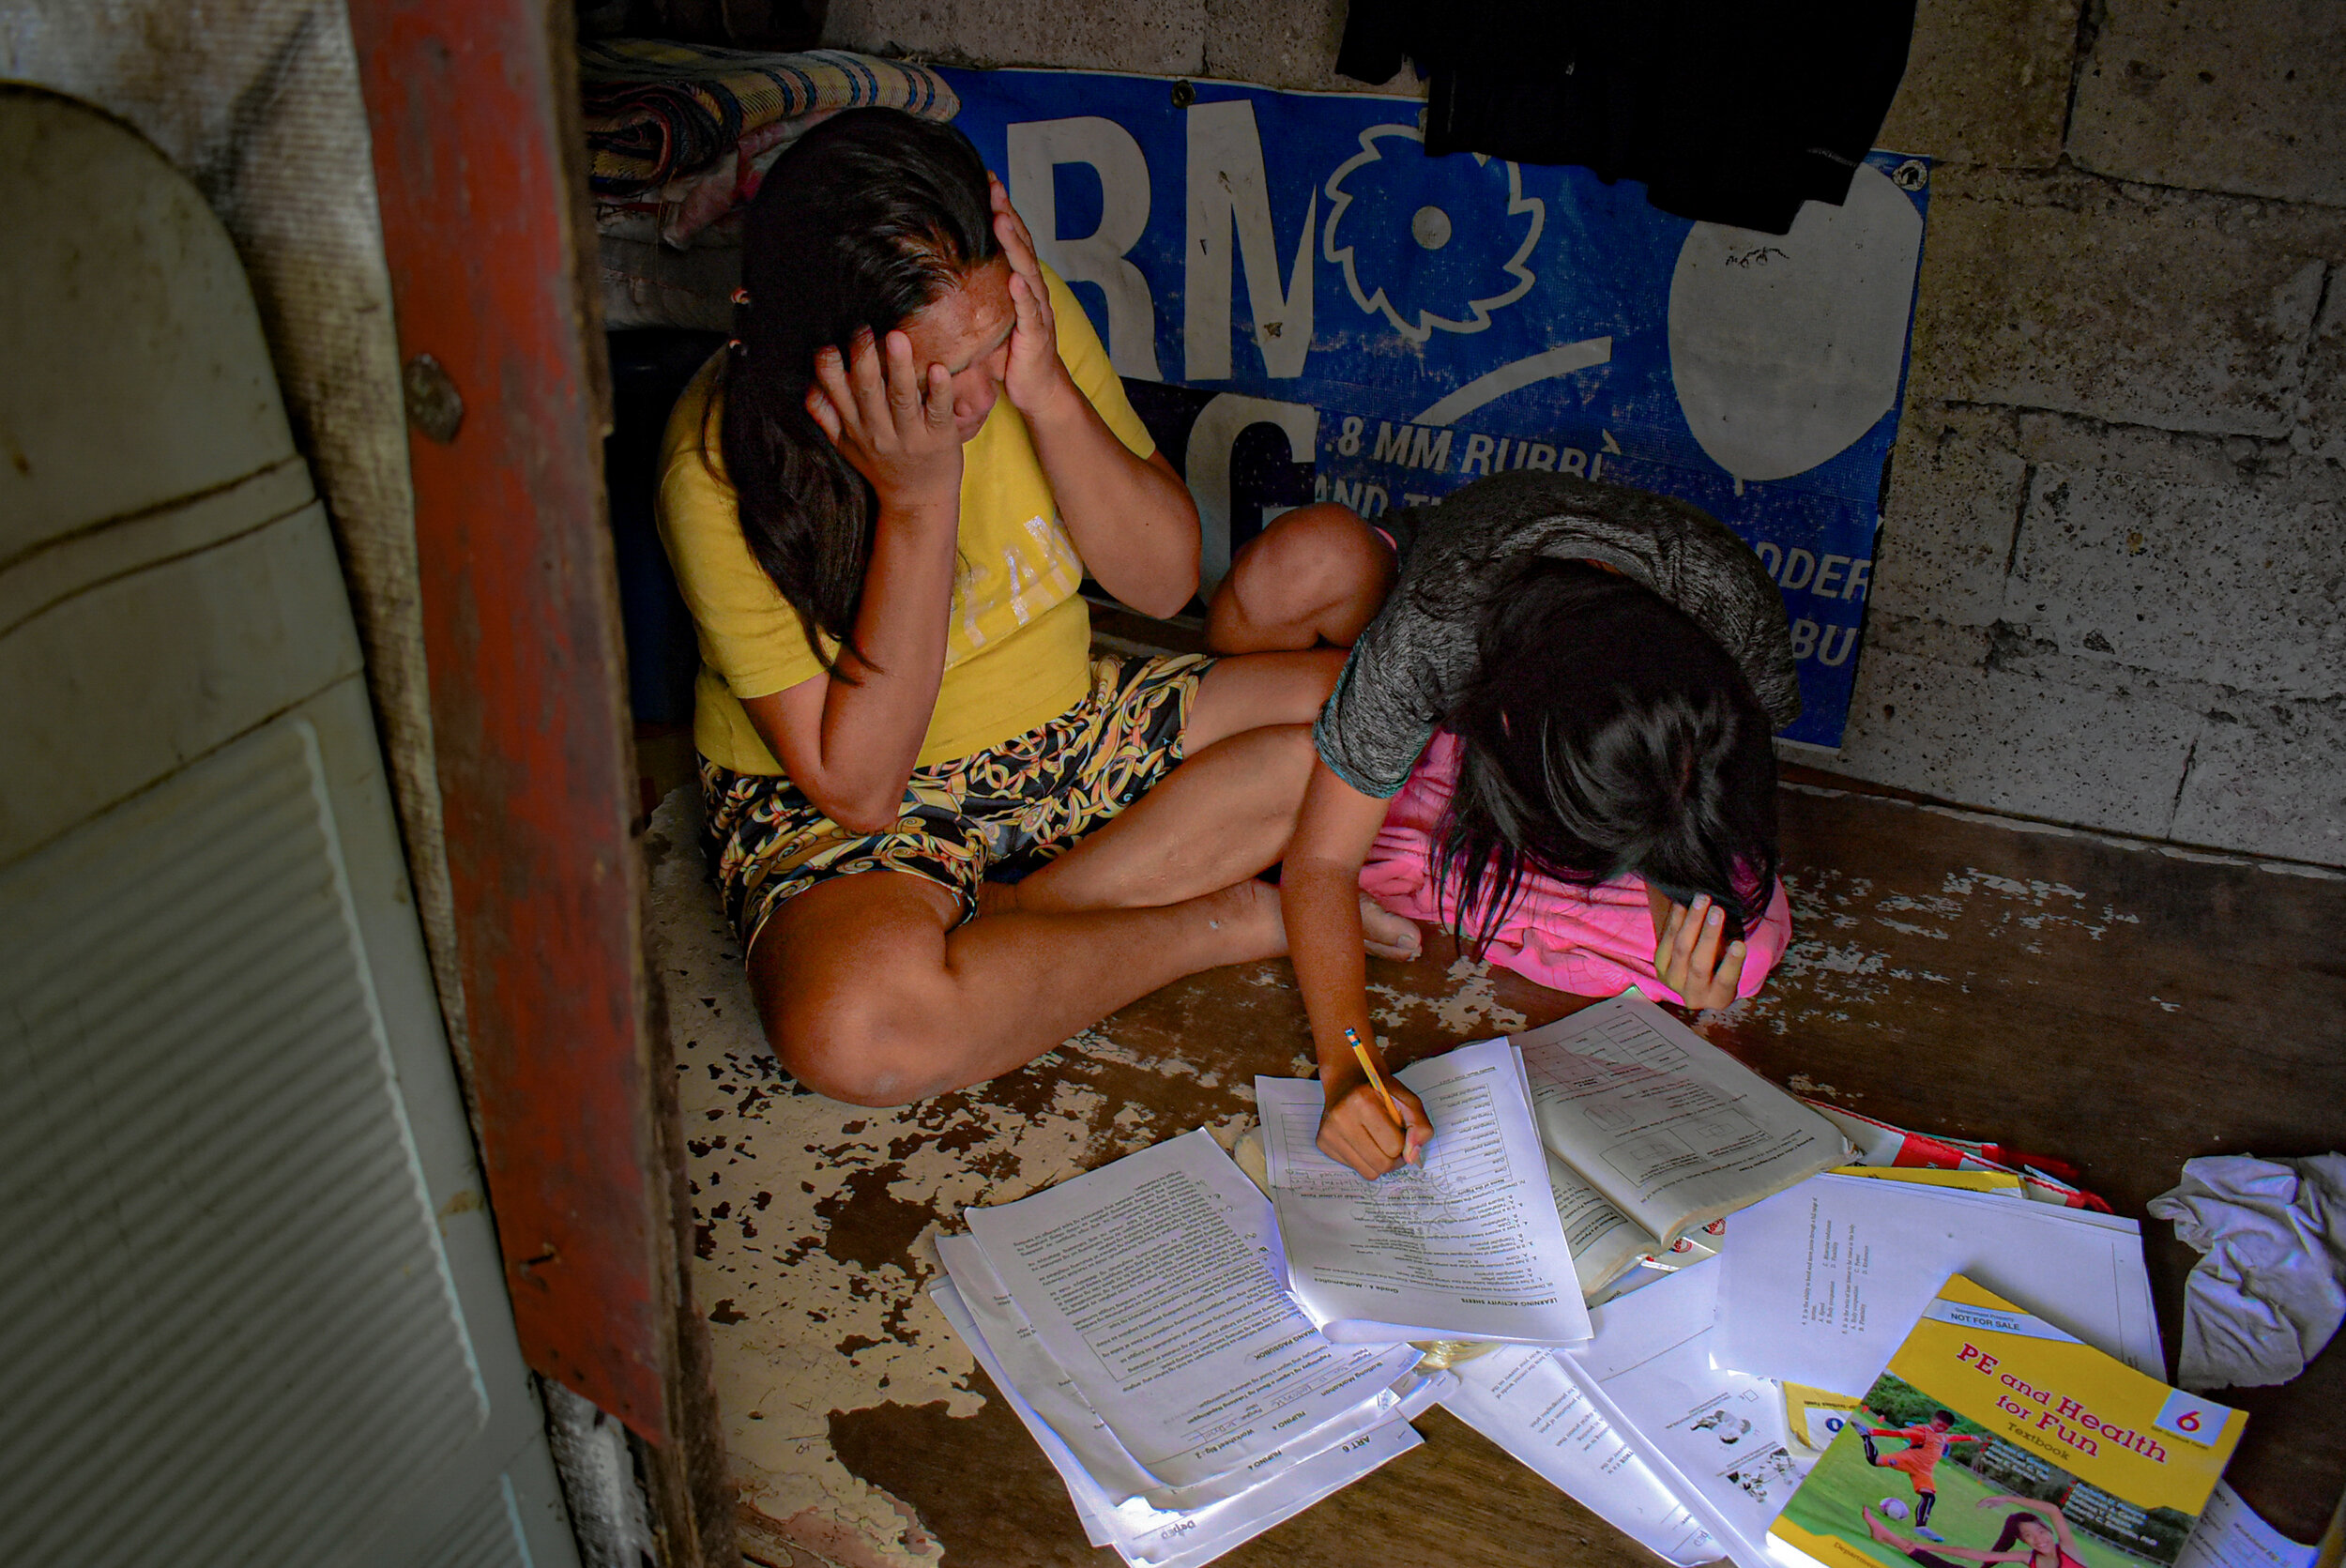  Nalangan, a high school graduate, finds it difficult to help her daughter out in some subjects such as music and math. The lessons are different from what they were taught before, she says. 